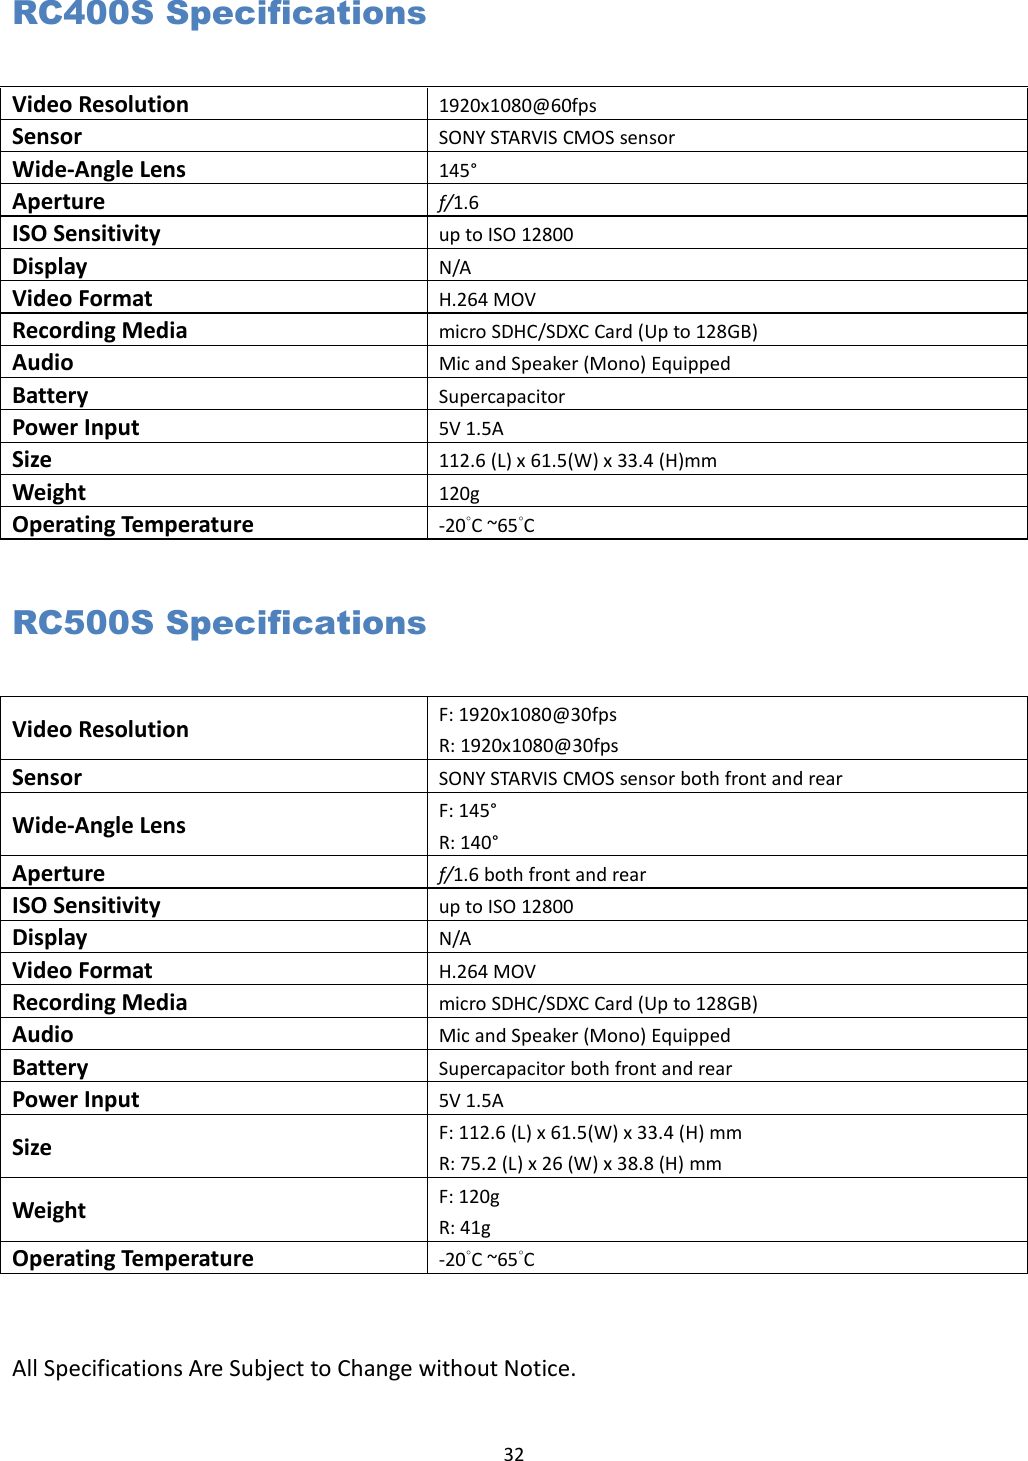  32 RC400S Specifications Video Resolution 1920x1080@60fps Sensor SONY STARVIS CMOS sensor Wide-Angle Lens 145° Aperture f/1.6 ISO Sensitivity up to ISO 12800 Display N/A Video Format H.264 MOV Recording Media micro SDHC/SDXC Card (Up to 128GB) Audio Mic and Speaker (Mono) Equipped Battery Supercapacitor Power Input 5V 1.5A Size 112.6 (L) x 61.5(W) x 33.4 (H)mm Weight 120g Operating Temperature -20°C ~65°C  RC500S Specifications Video Resolution F: 1920x1080@30fps R: 1920x1080@30fps Sensor SONY STARVIS CMOS sensor both front and rear Wide-Angle Lens F: 145° R: 140° Aperture f/1.6 both front and rear ISO Sensitivity up to ISO 12800 Display N/A Video Format H.264 MOV Recording Media micro SDHC/SDXC Card (Up to 128GB) Audio Mic and Speaker (Mono) Equipped Battery Supercapacitor both front and rear Power Input 5V 1.5A Size F: 112.6 (L) x 61.5(W) x 33.4 (H) mm R: 75.2 (L) x 26 (W) x 38.8 (H) mm Weight F: 120g R: 41g Operating Temperature -20°C ~65°C   All Specifications Are Subject to Change without Notice.  